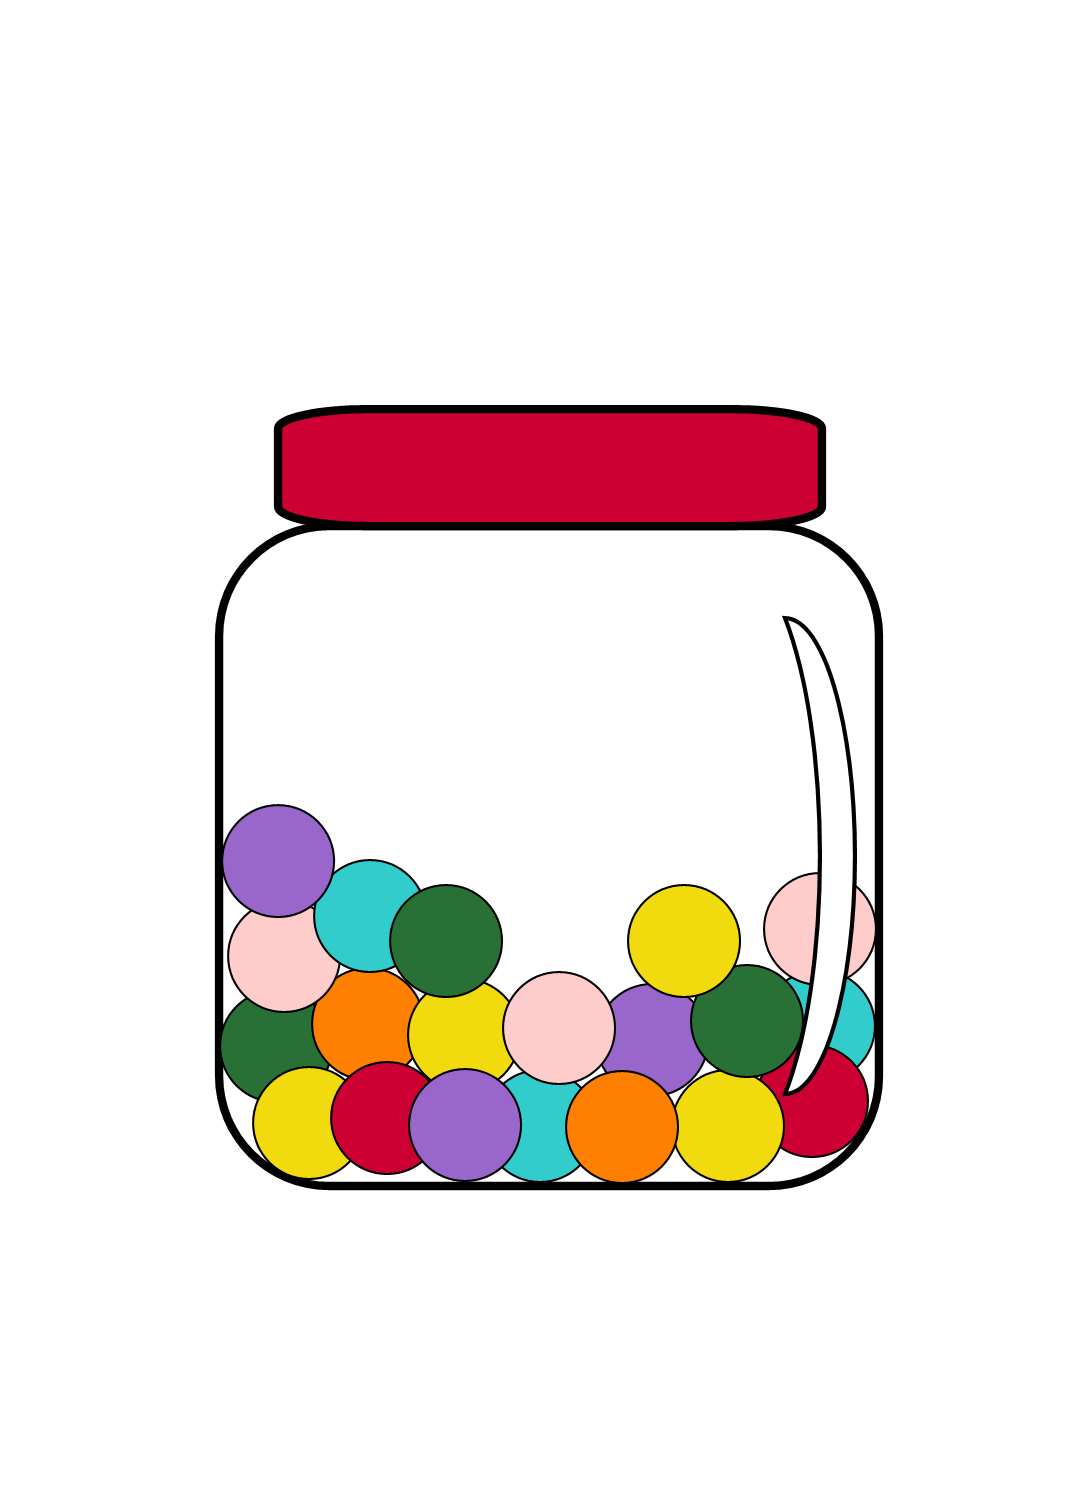 Free Candy Jar Clip Art Candy Jar Half Full Of Colorful Candy Or